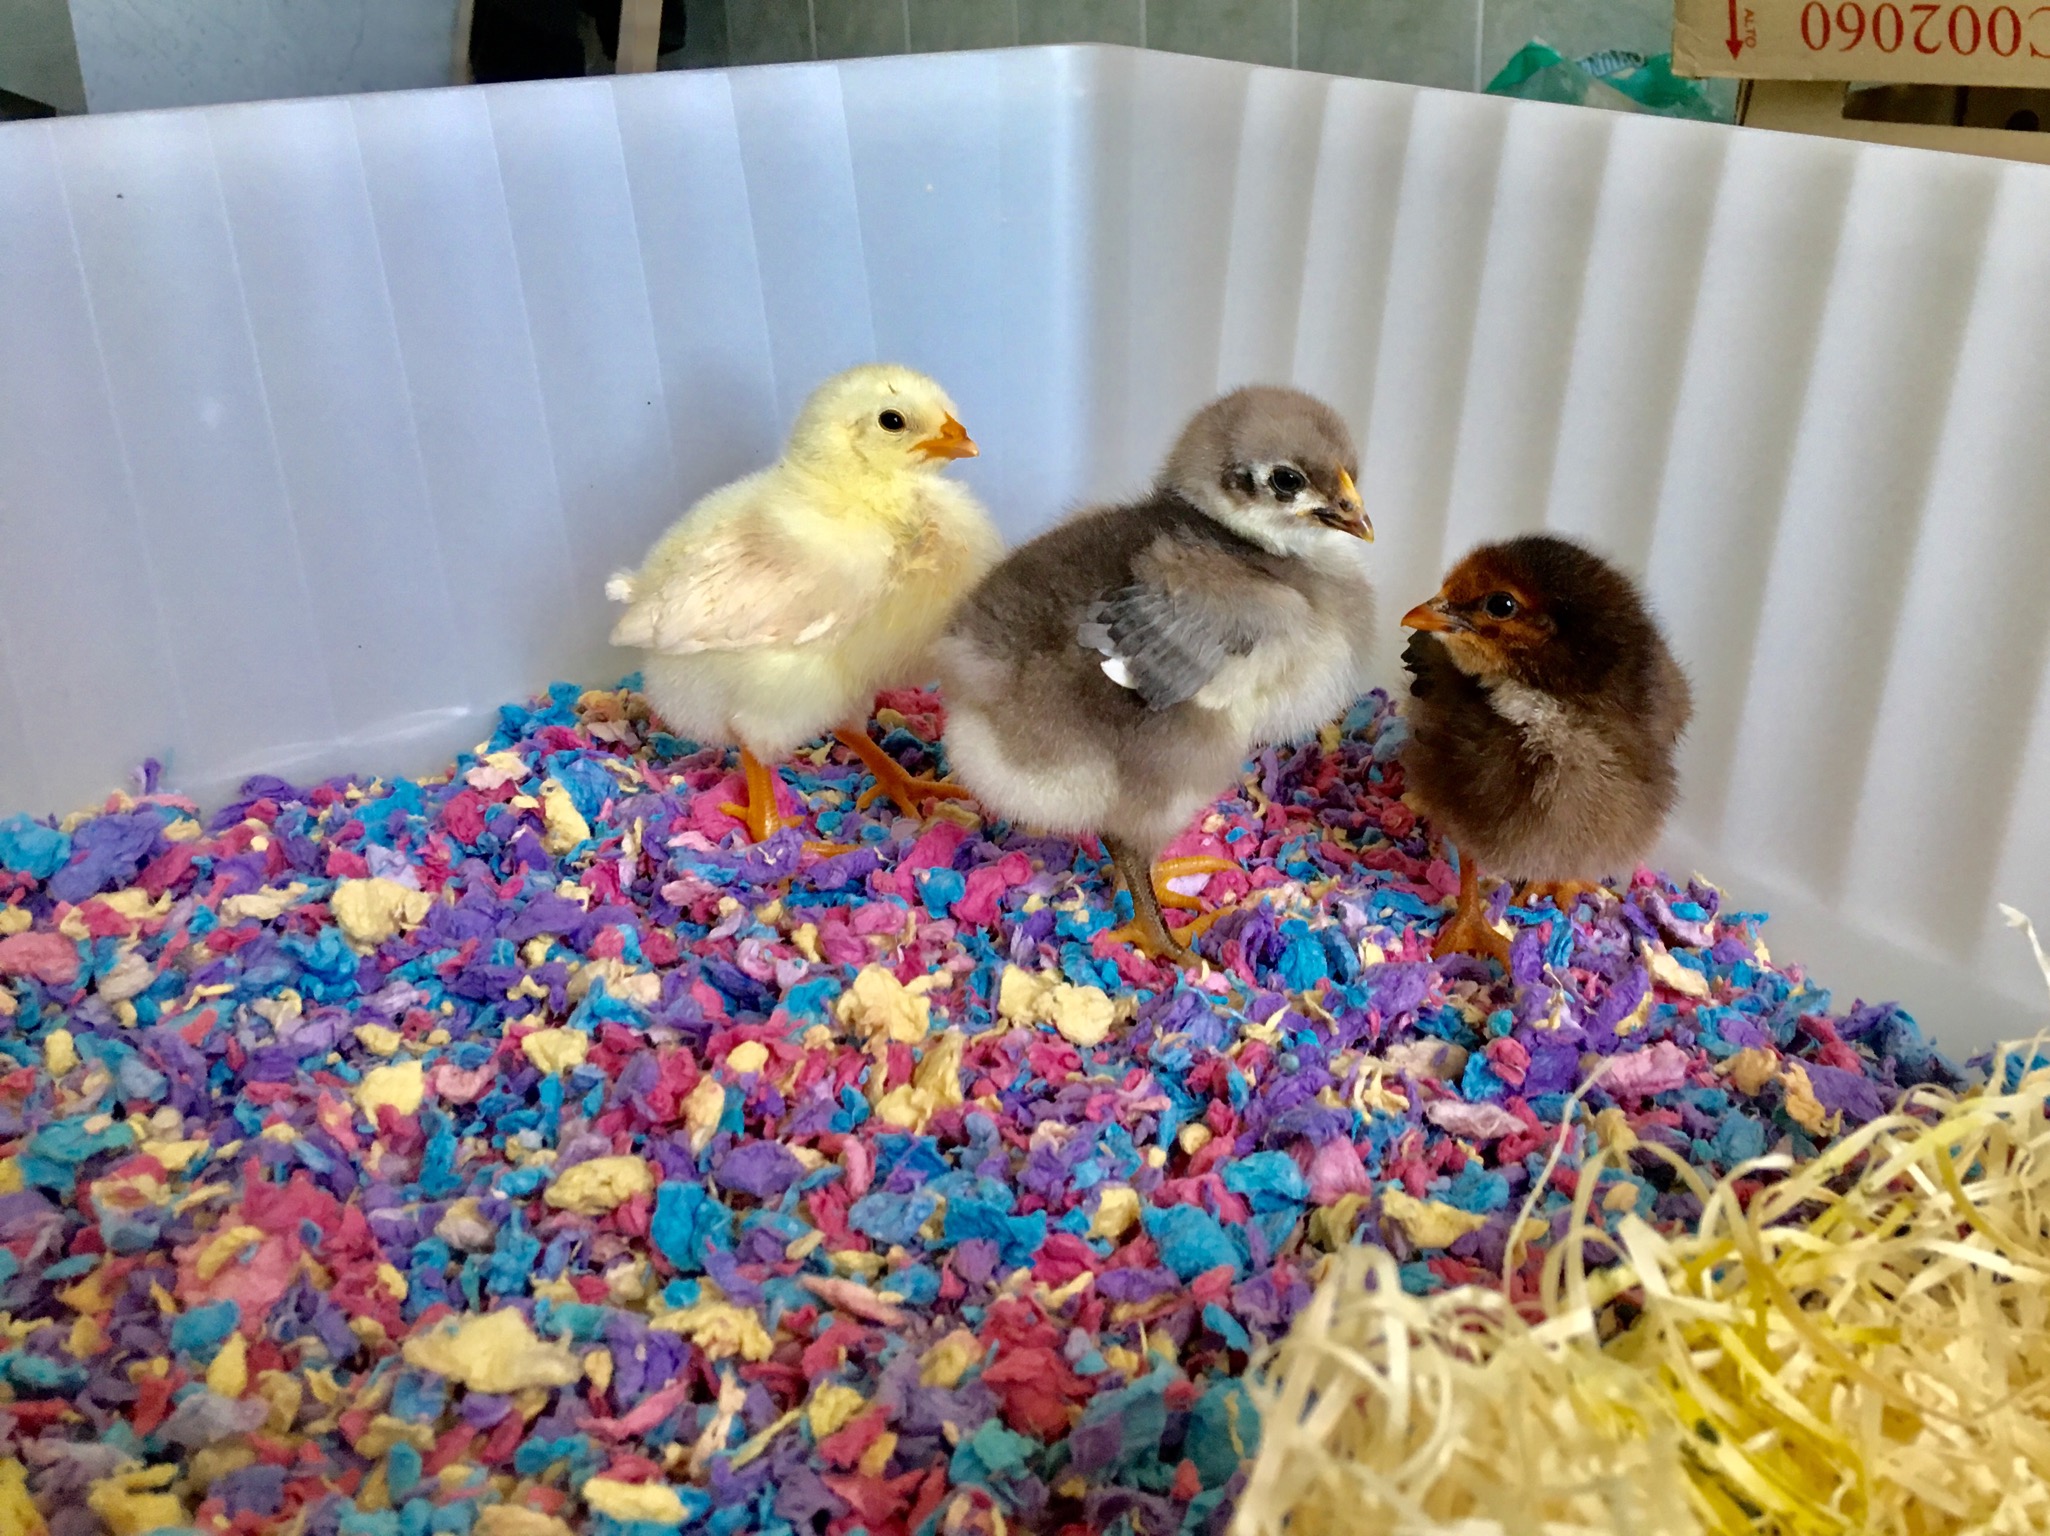 three small chicks, one yellow, one brown and one grey in a bedding tray